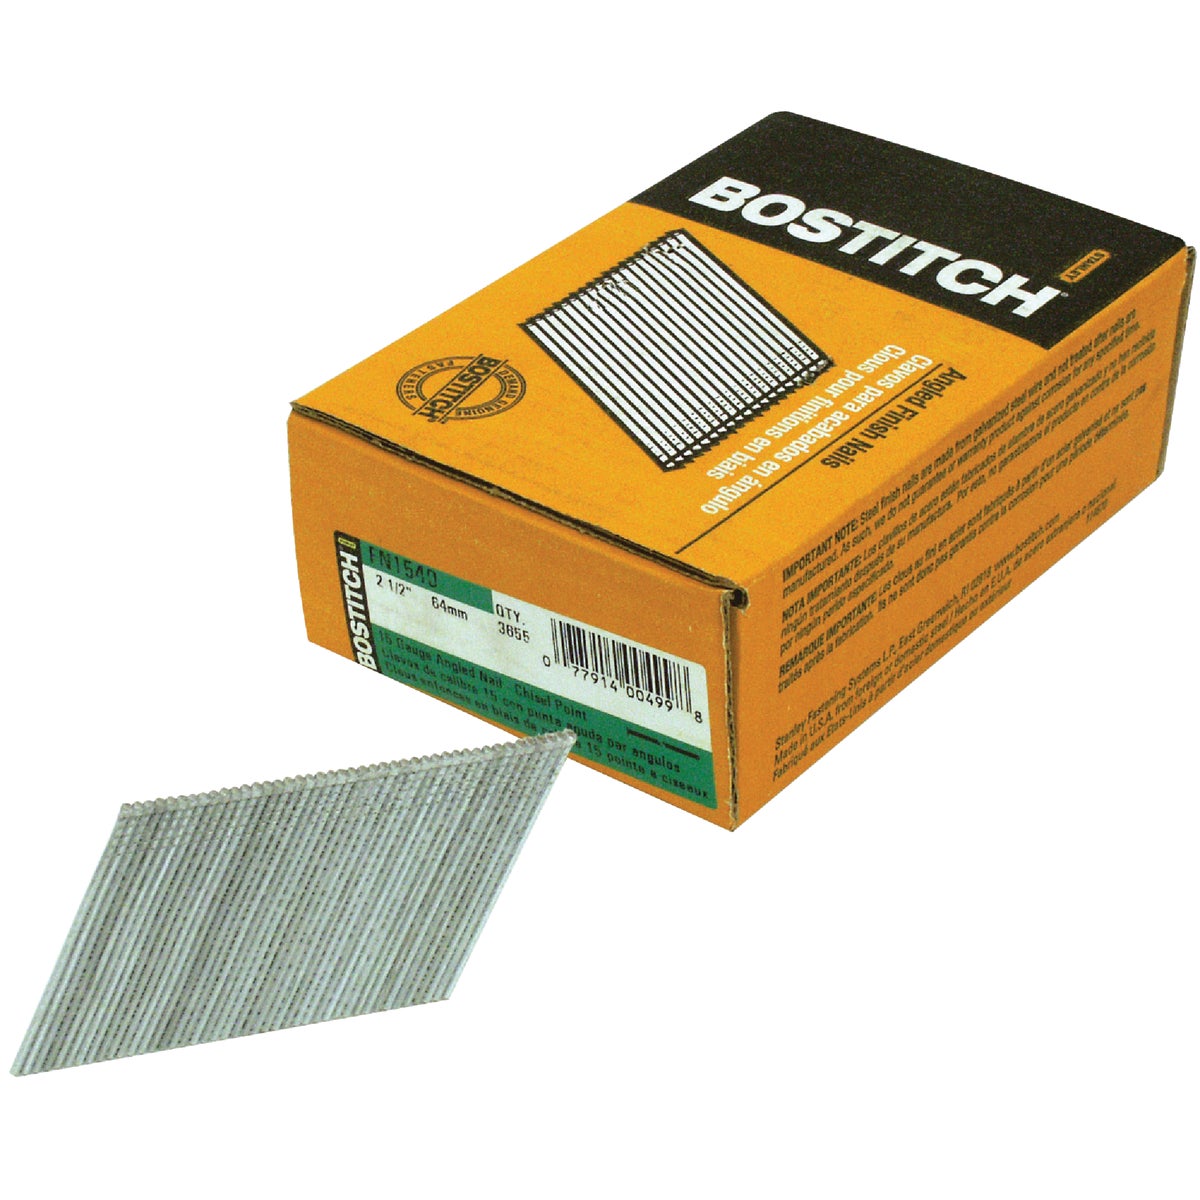 Bostitch 15-Gauge Coated 25 Degree FN-Style Angled Finish Nail, 2-1/2 In. (3655 Ct.)